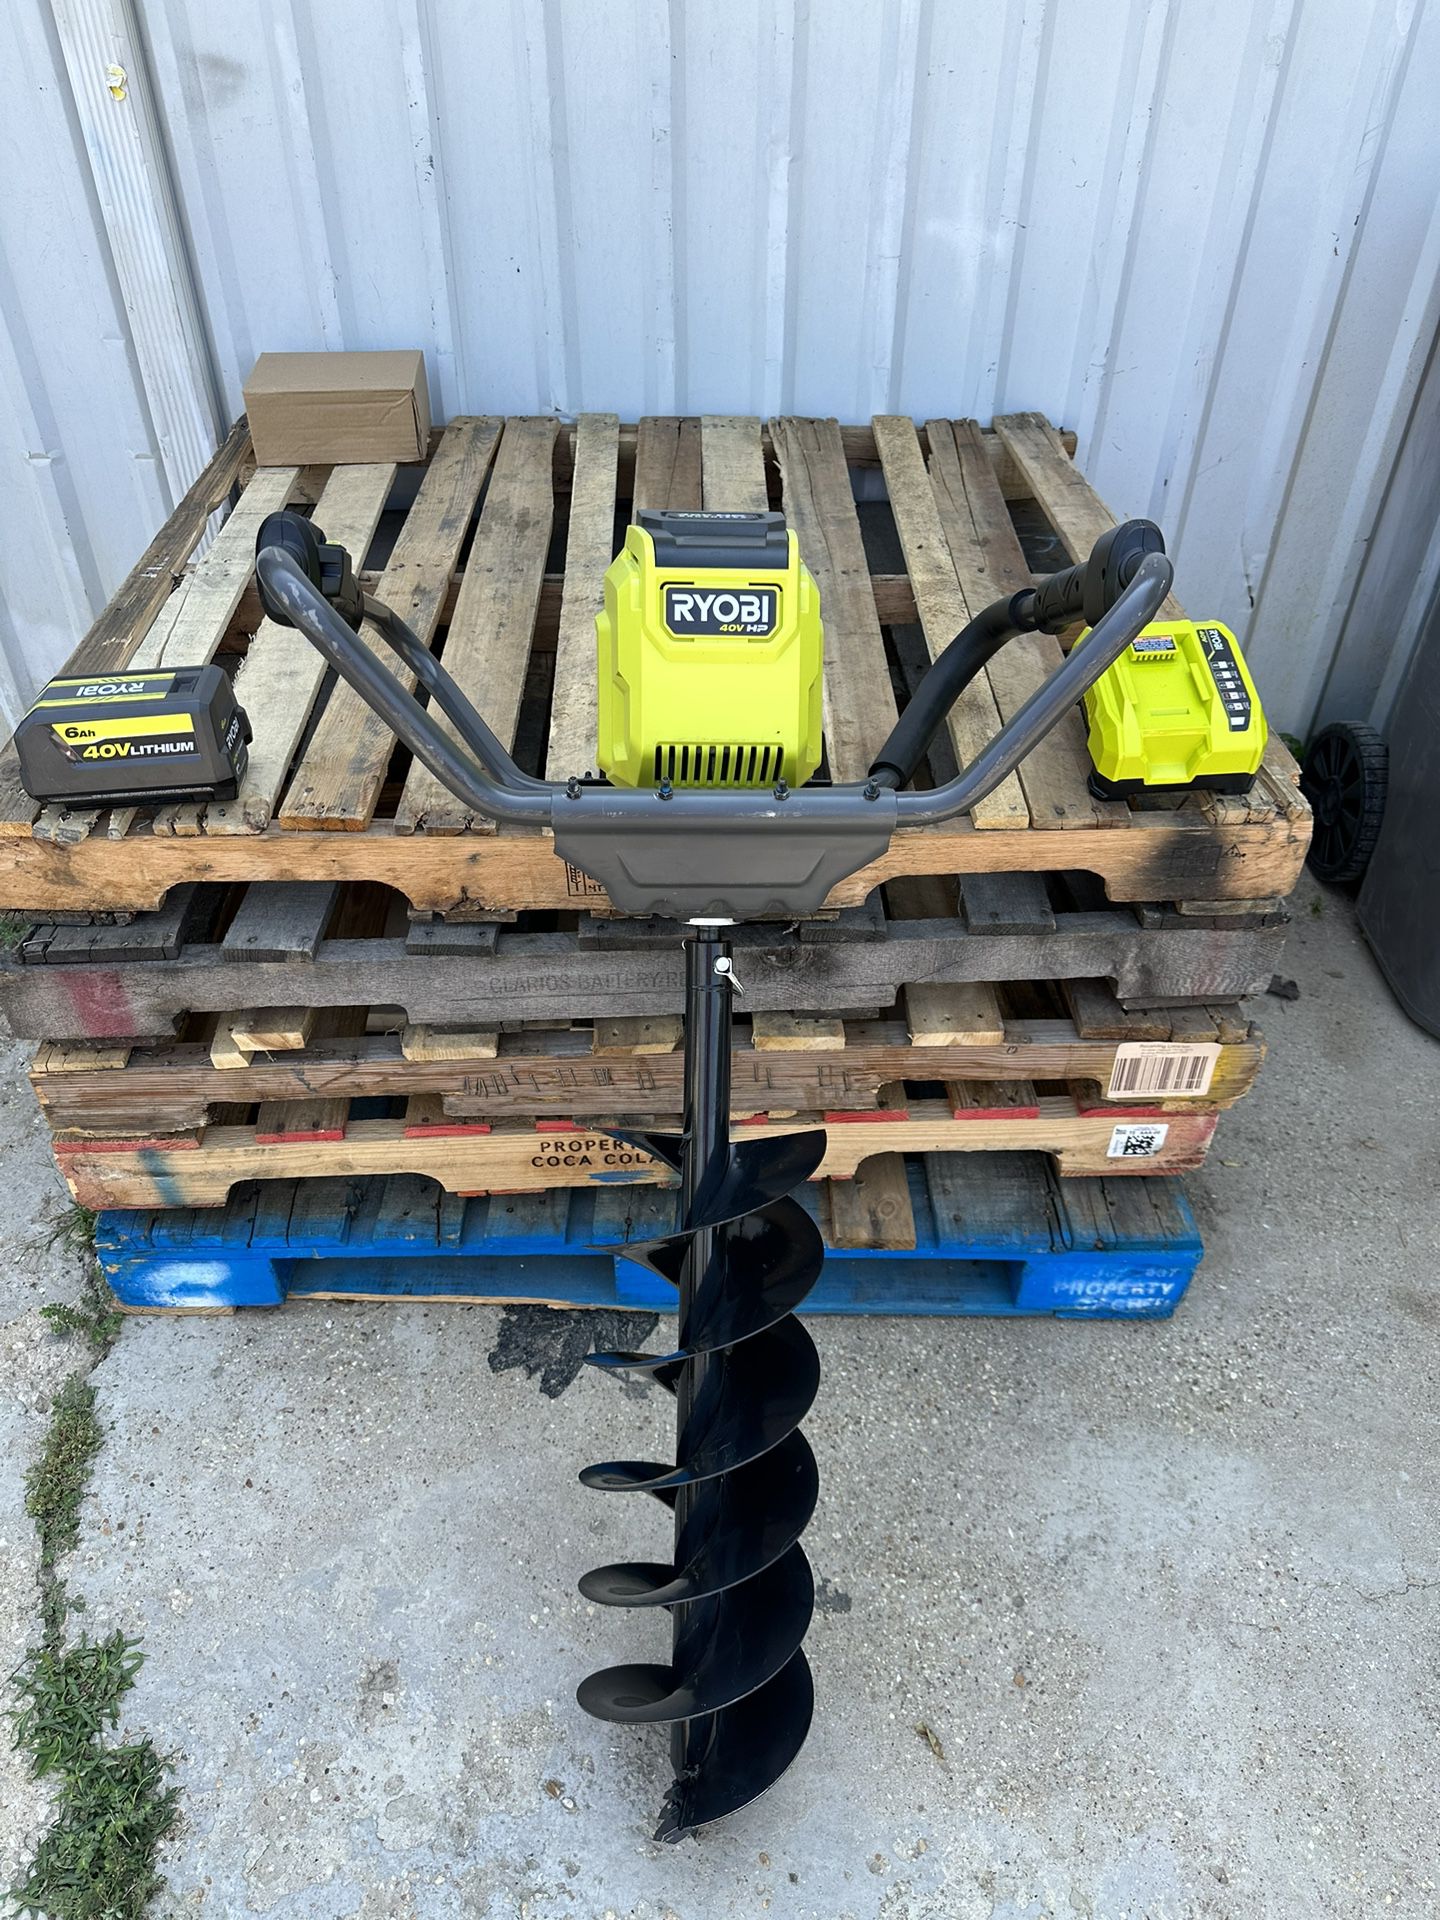 RYOBI 40V HP Brushless Cordless Earth Auger with 8 in. Bit with 6.0 Ah Battery + Charger New $350